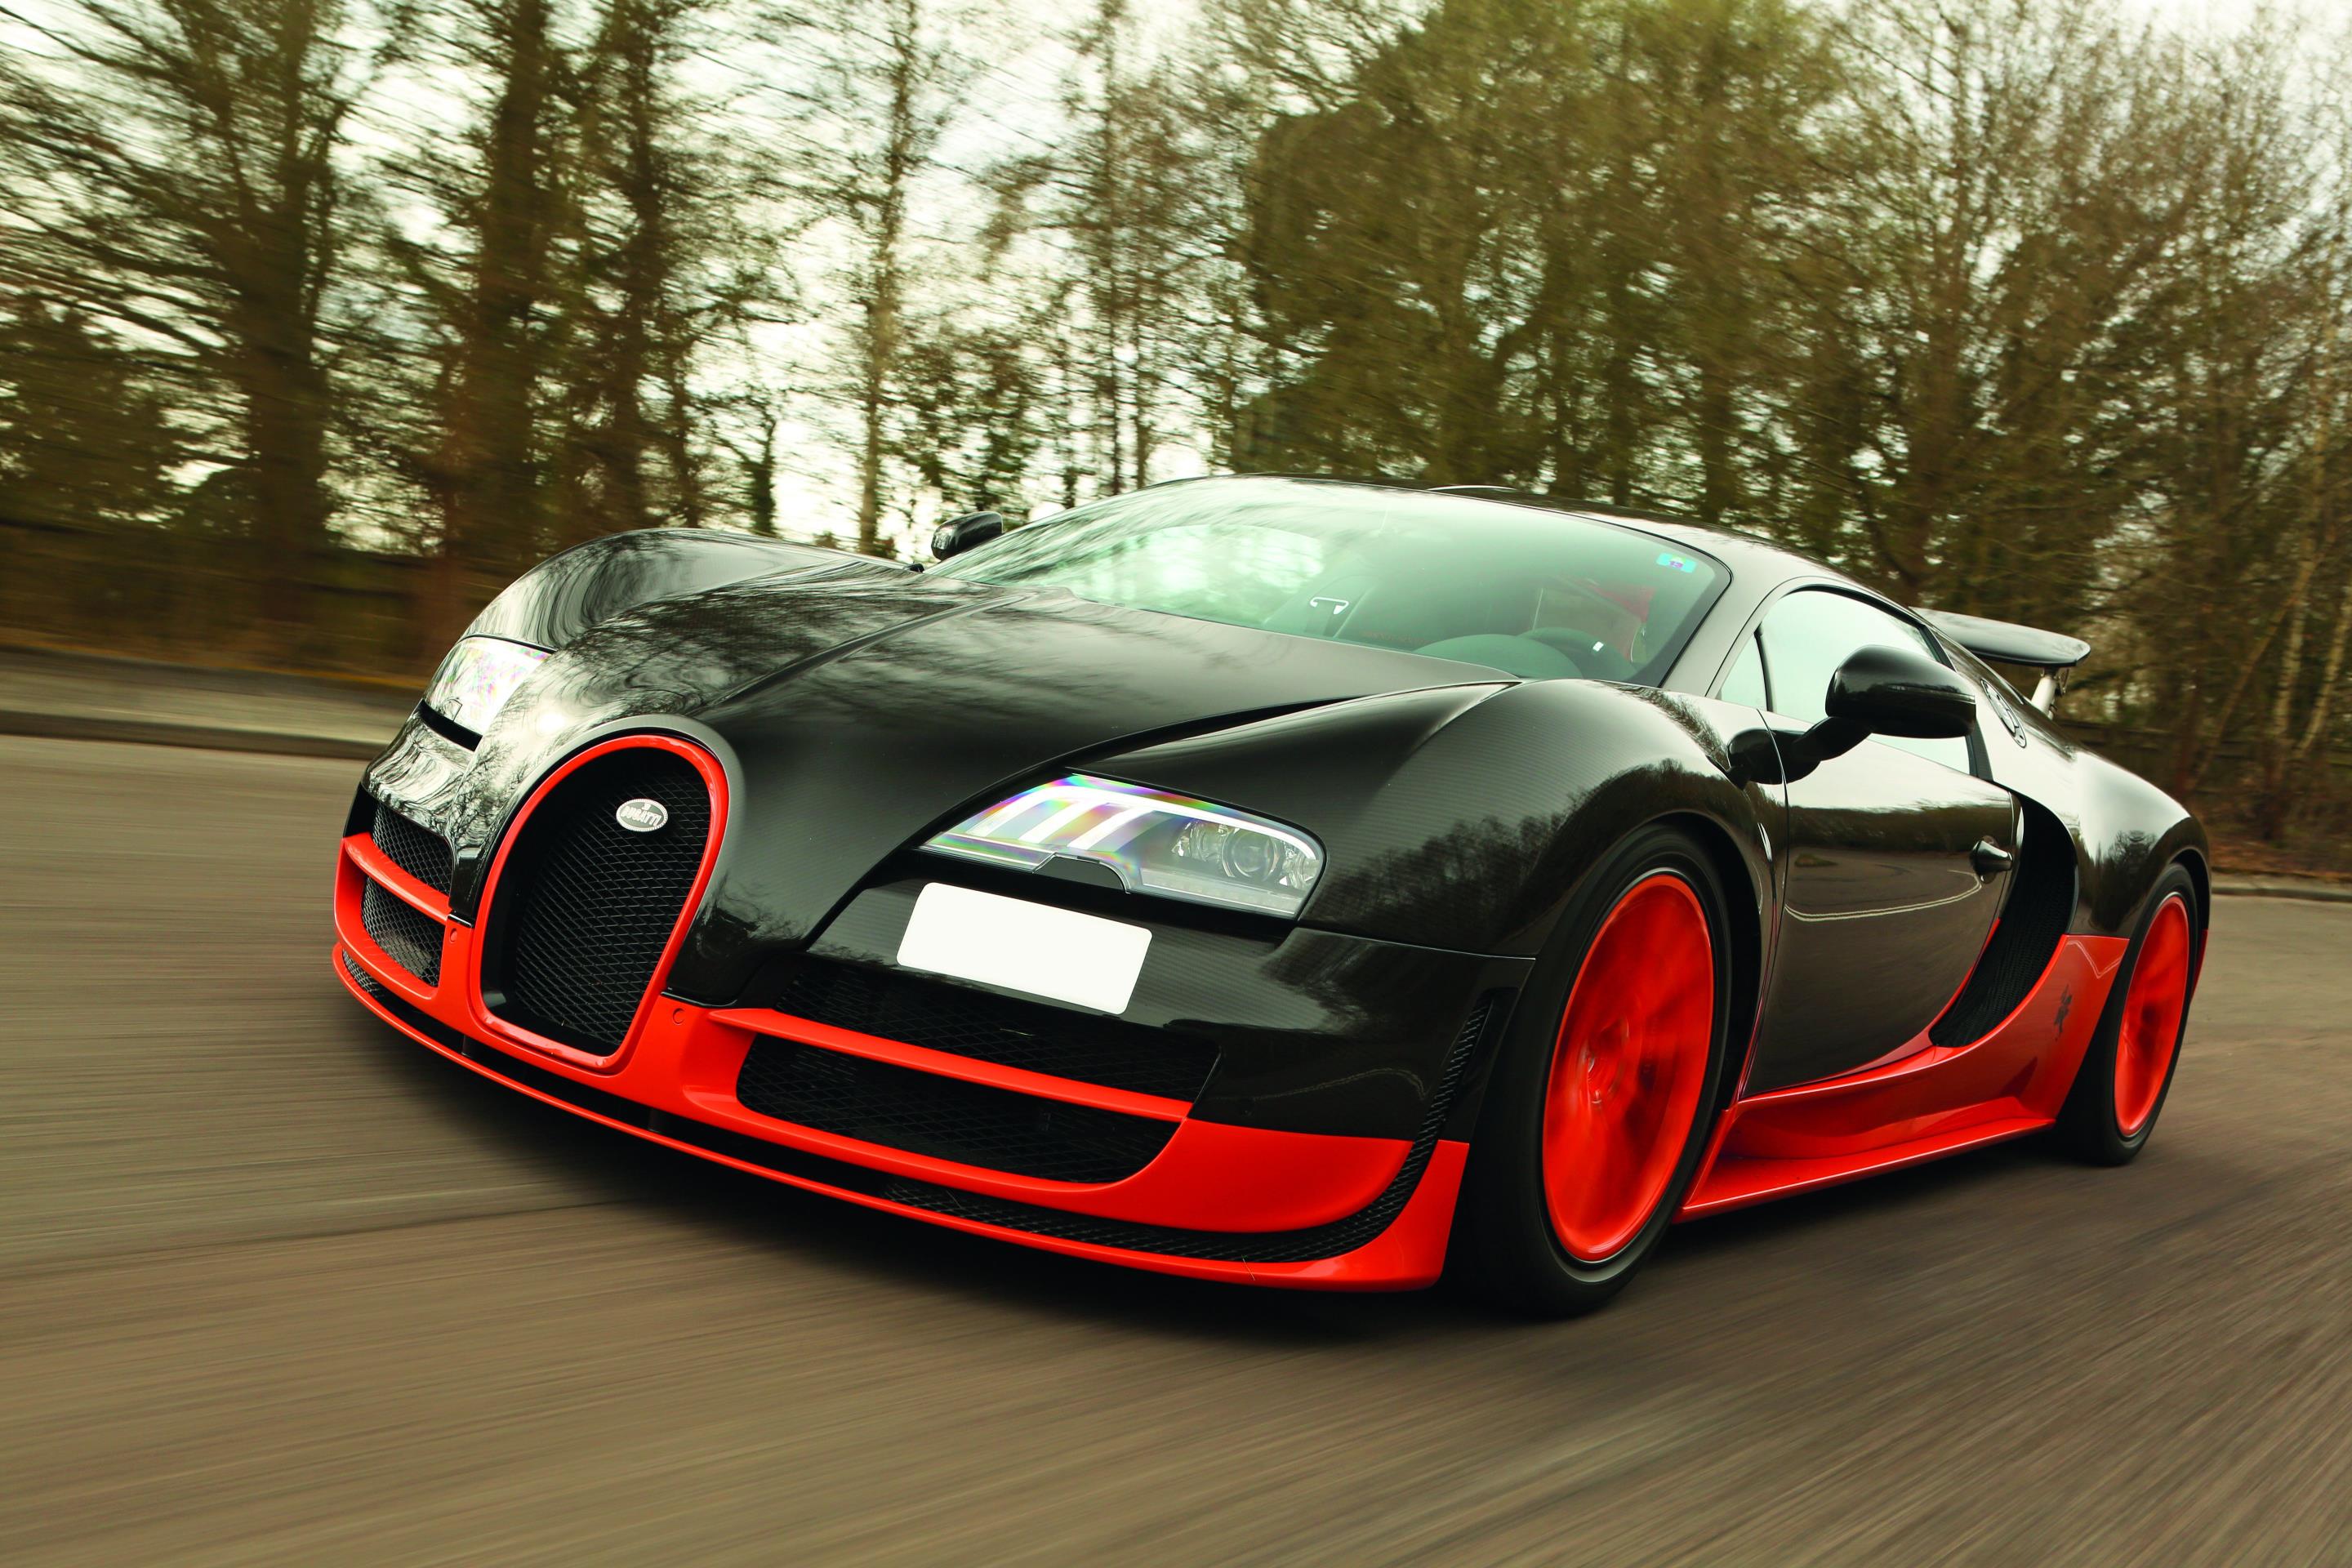 The Veyron remains one of the fastest cars in the world 